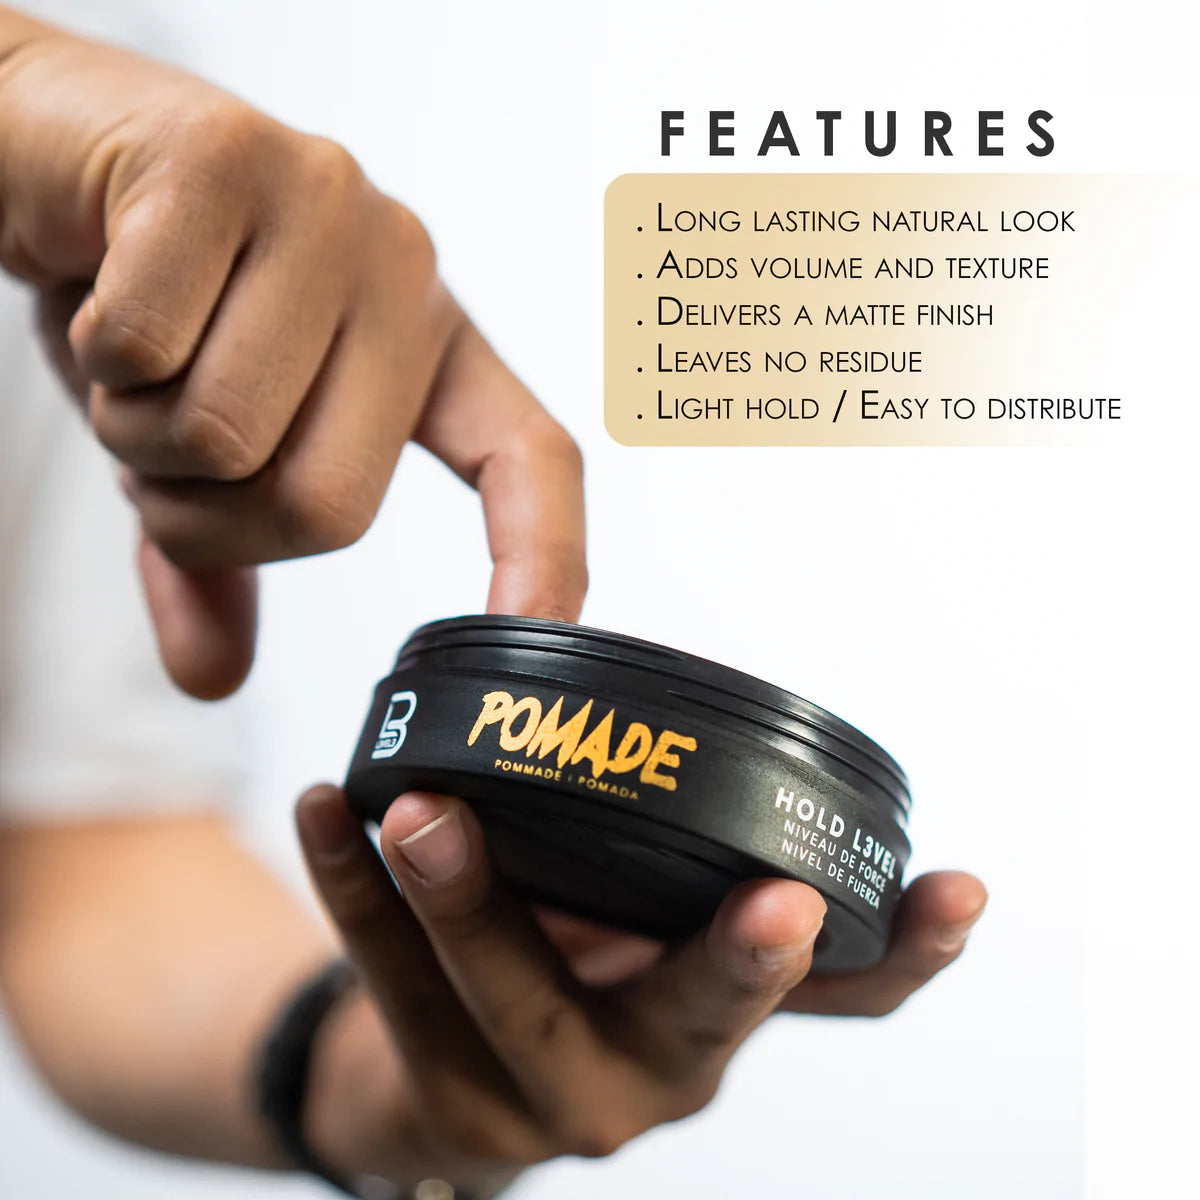 UBS - Cambie - New Product Alert! Level 3 Styling Powder is a